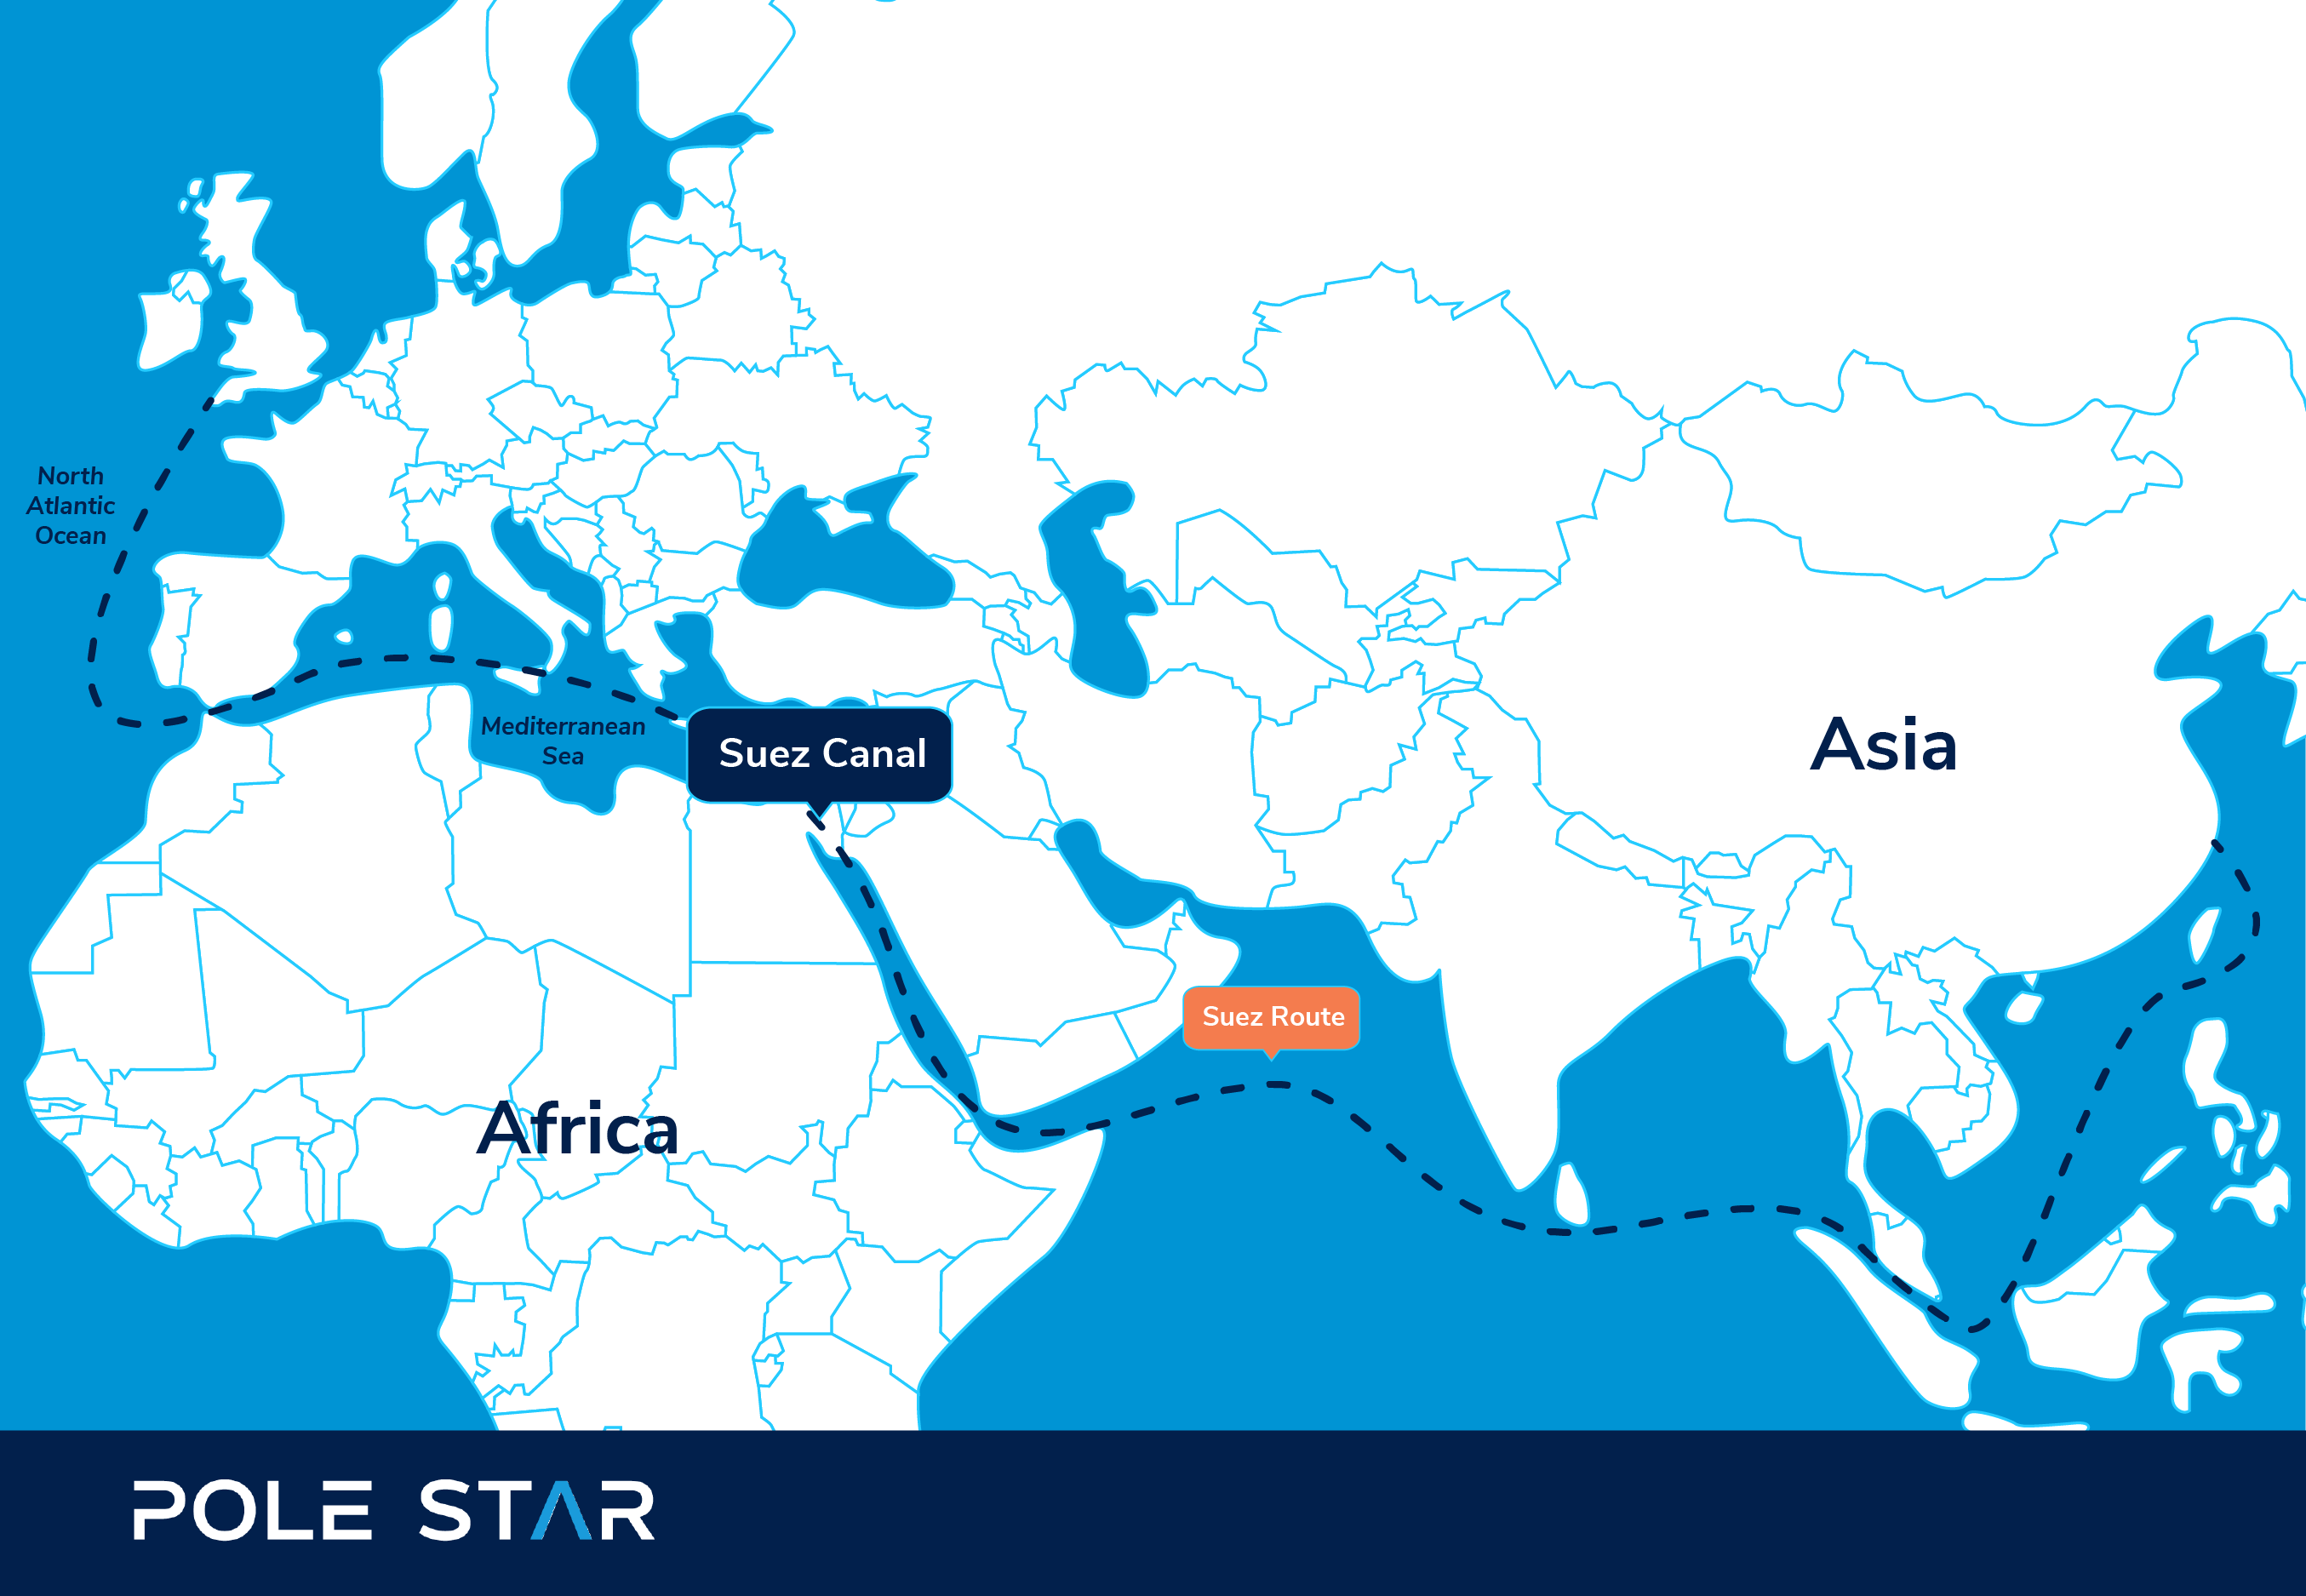 Suez Canal map - Offers a Direct Route Between the North Atlantic and Northern Indian Oceans